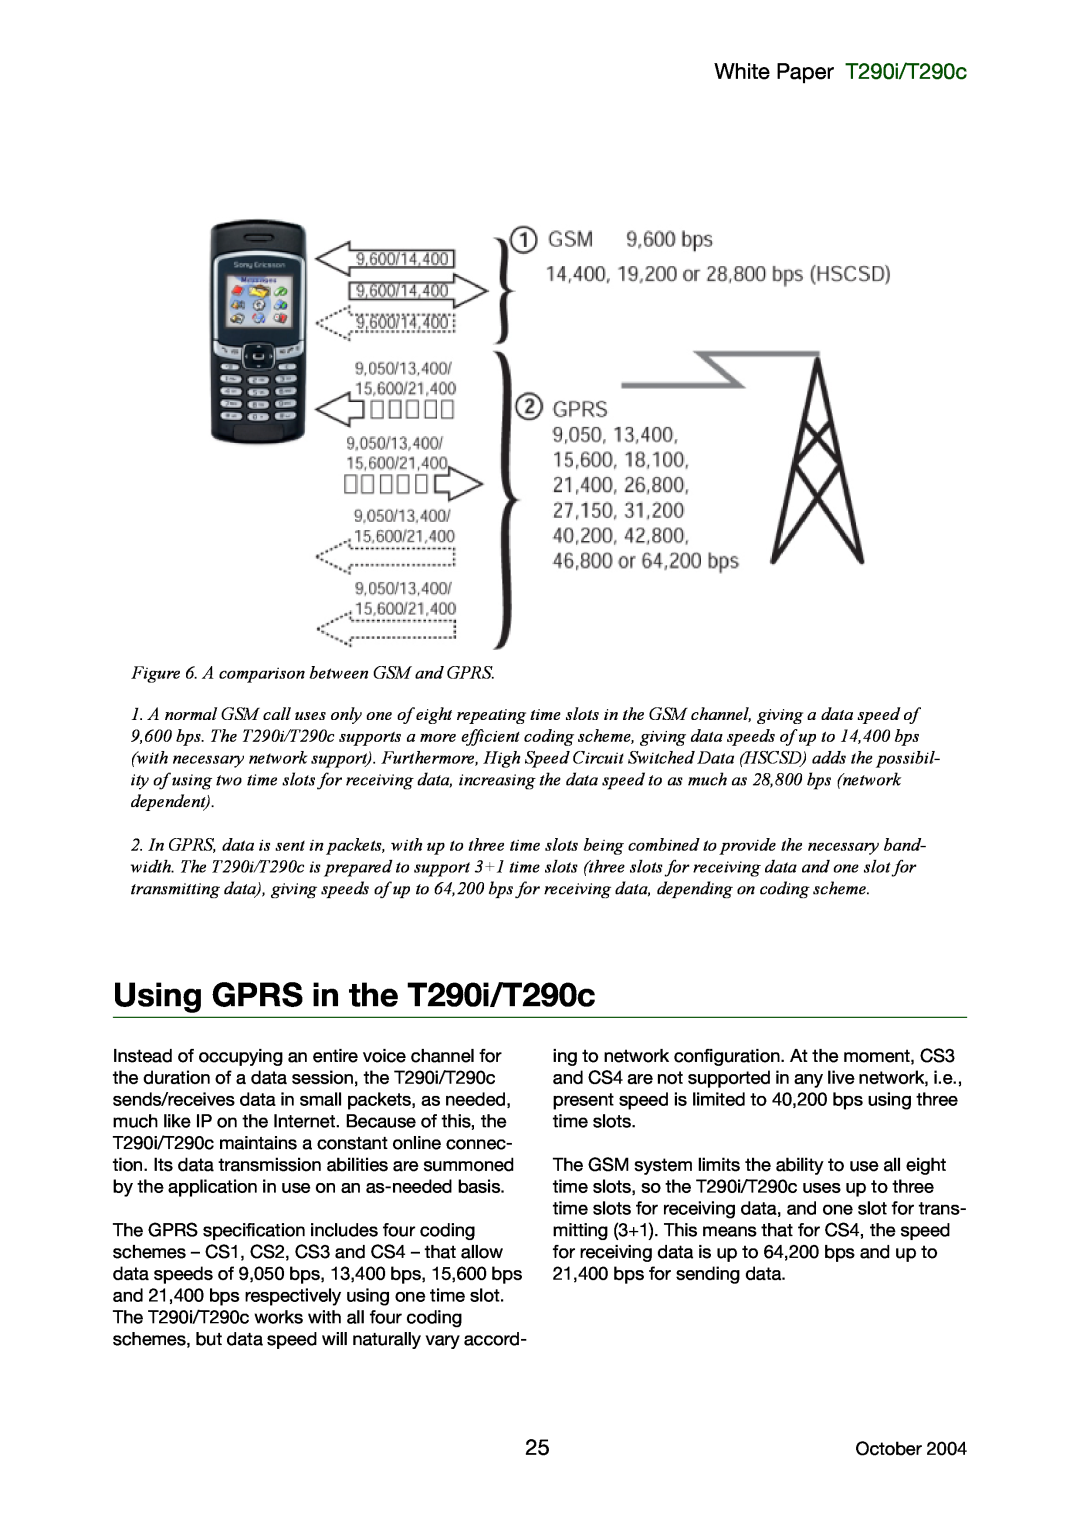 Sony Ericsson manual Using GPRS in the T290i/T290c, White Paper T290i/T290c, A comparison between GSM and GPRS 